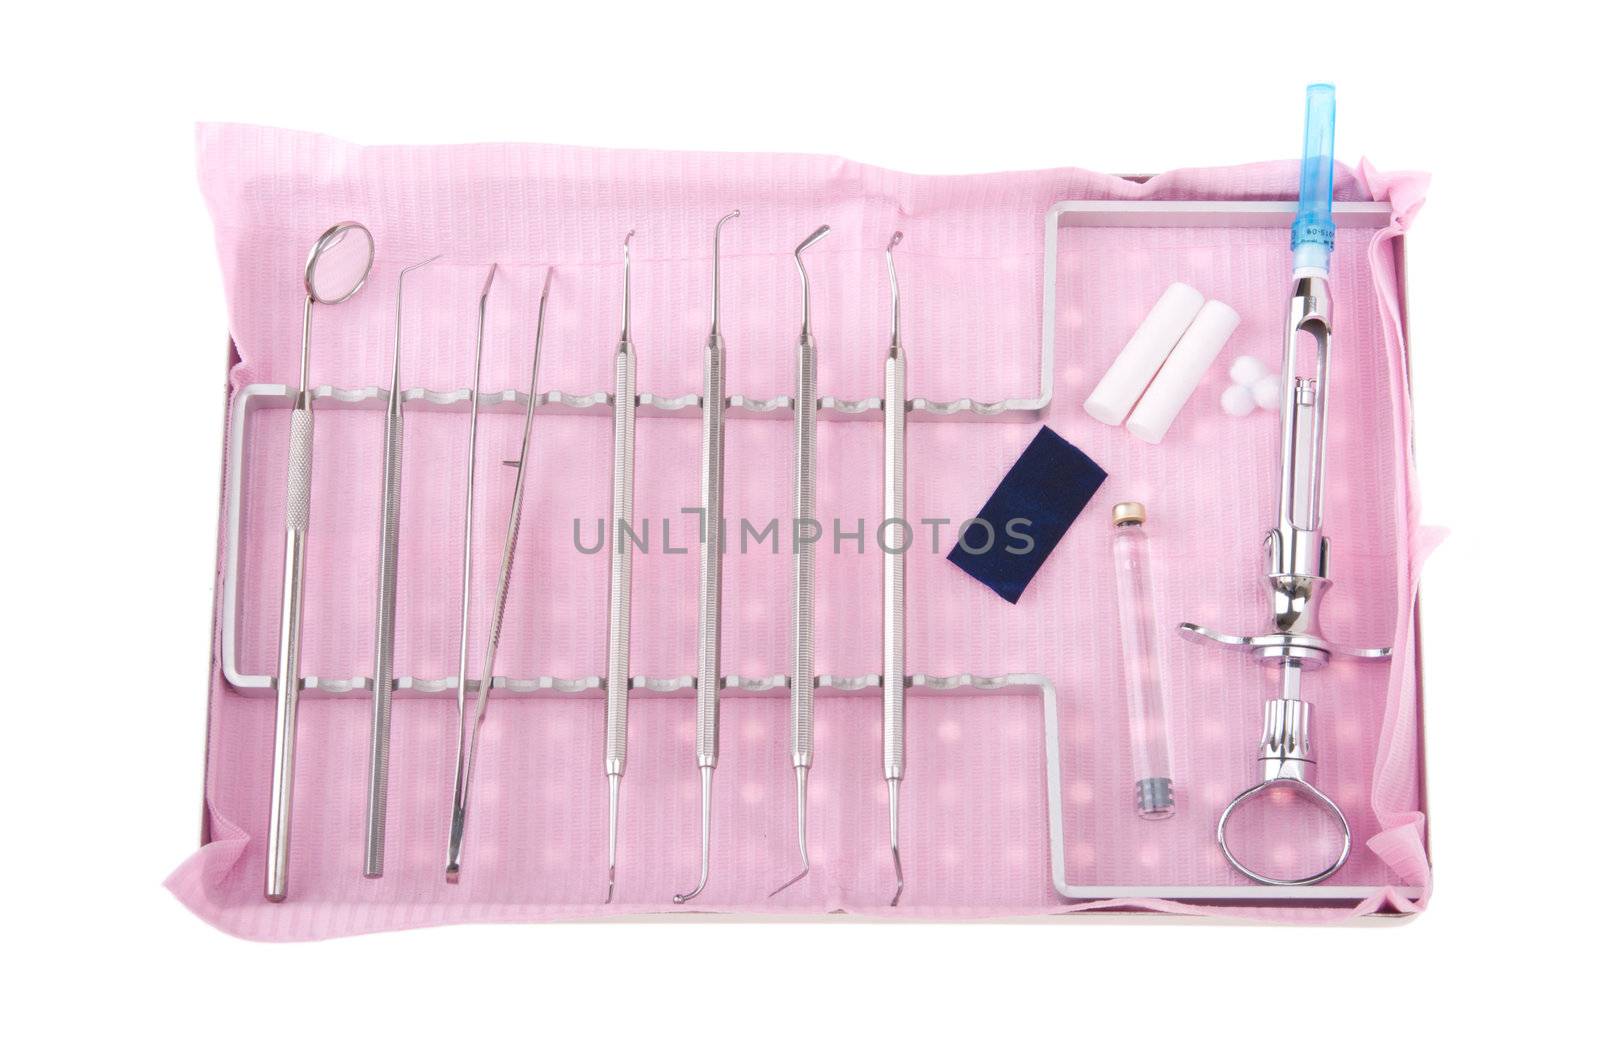 dentistry kit in a tray on pink bib (surgery instruments, articulation paper, cotton rolls/wools, cartridge and syringe)